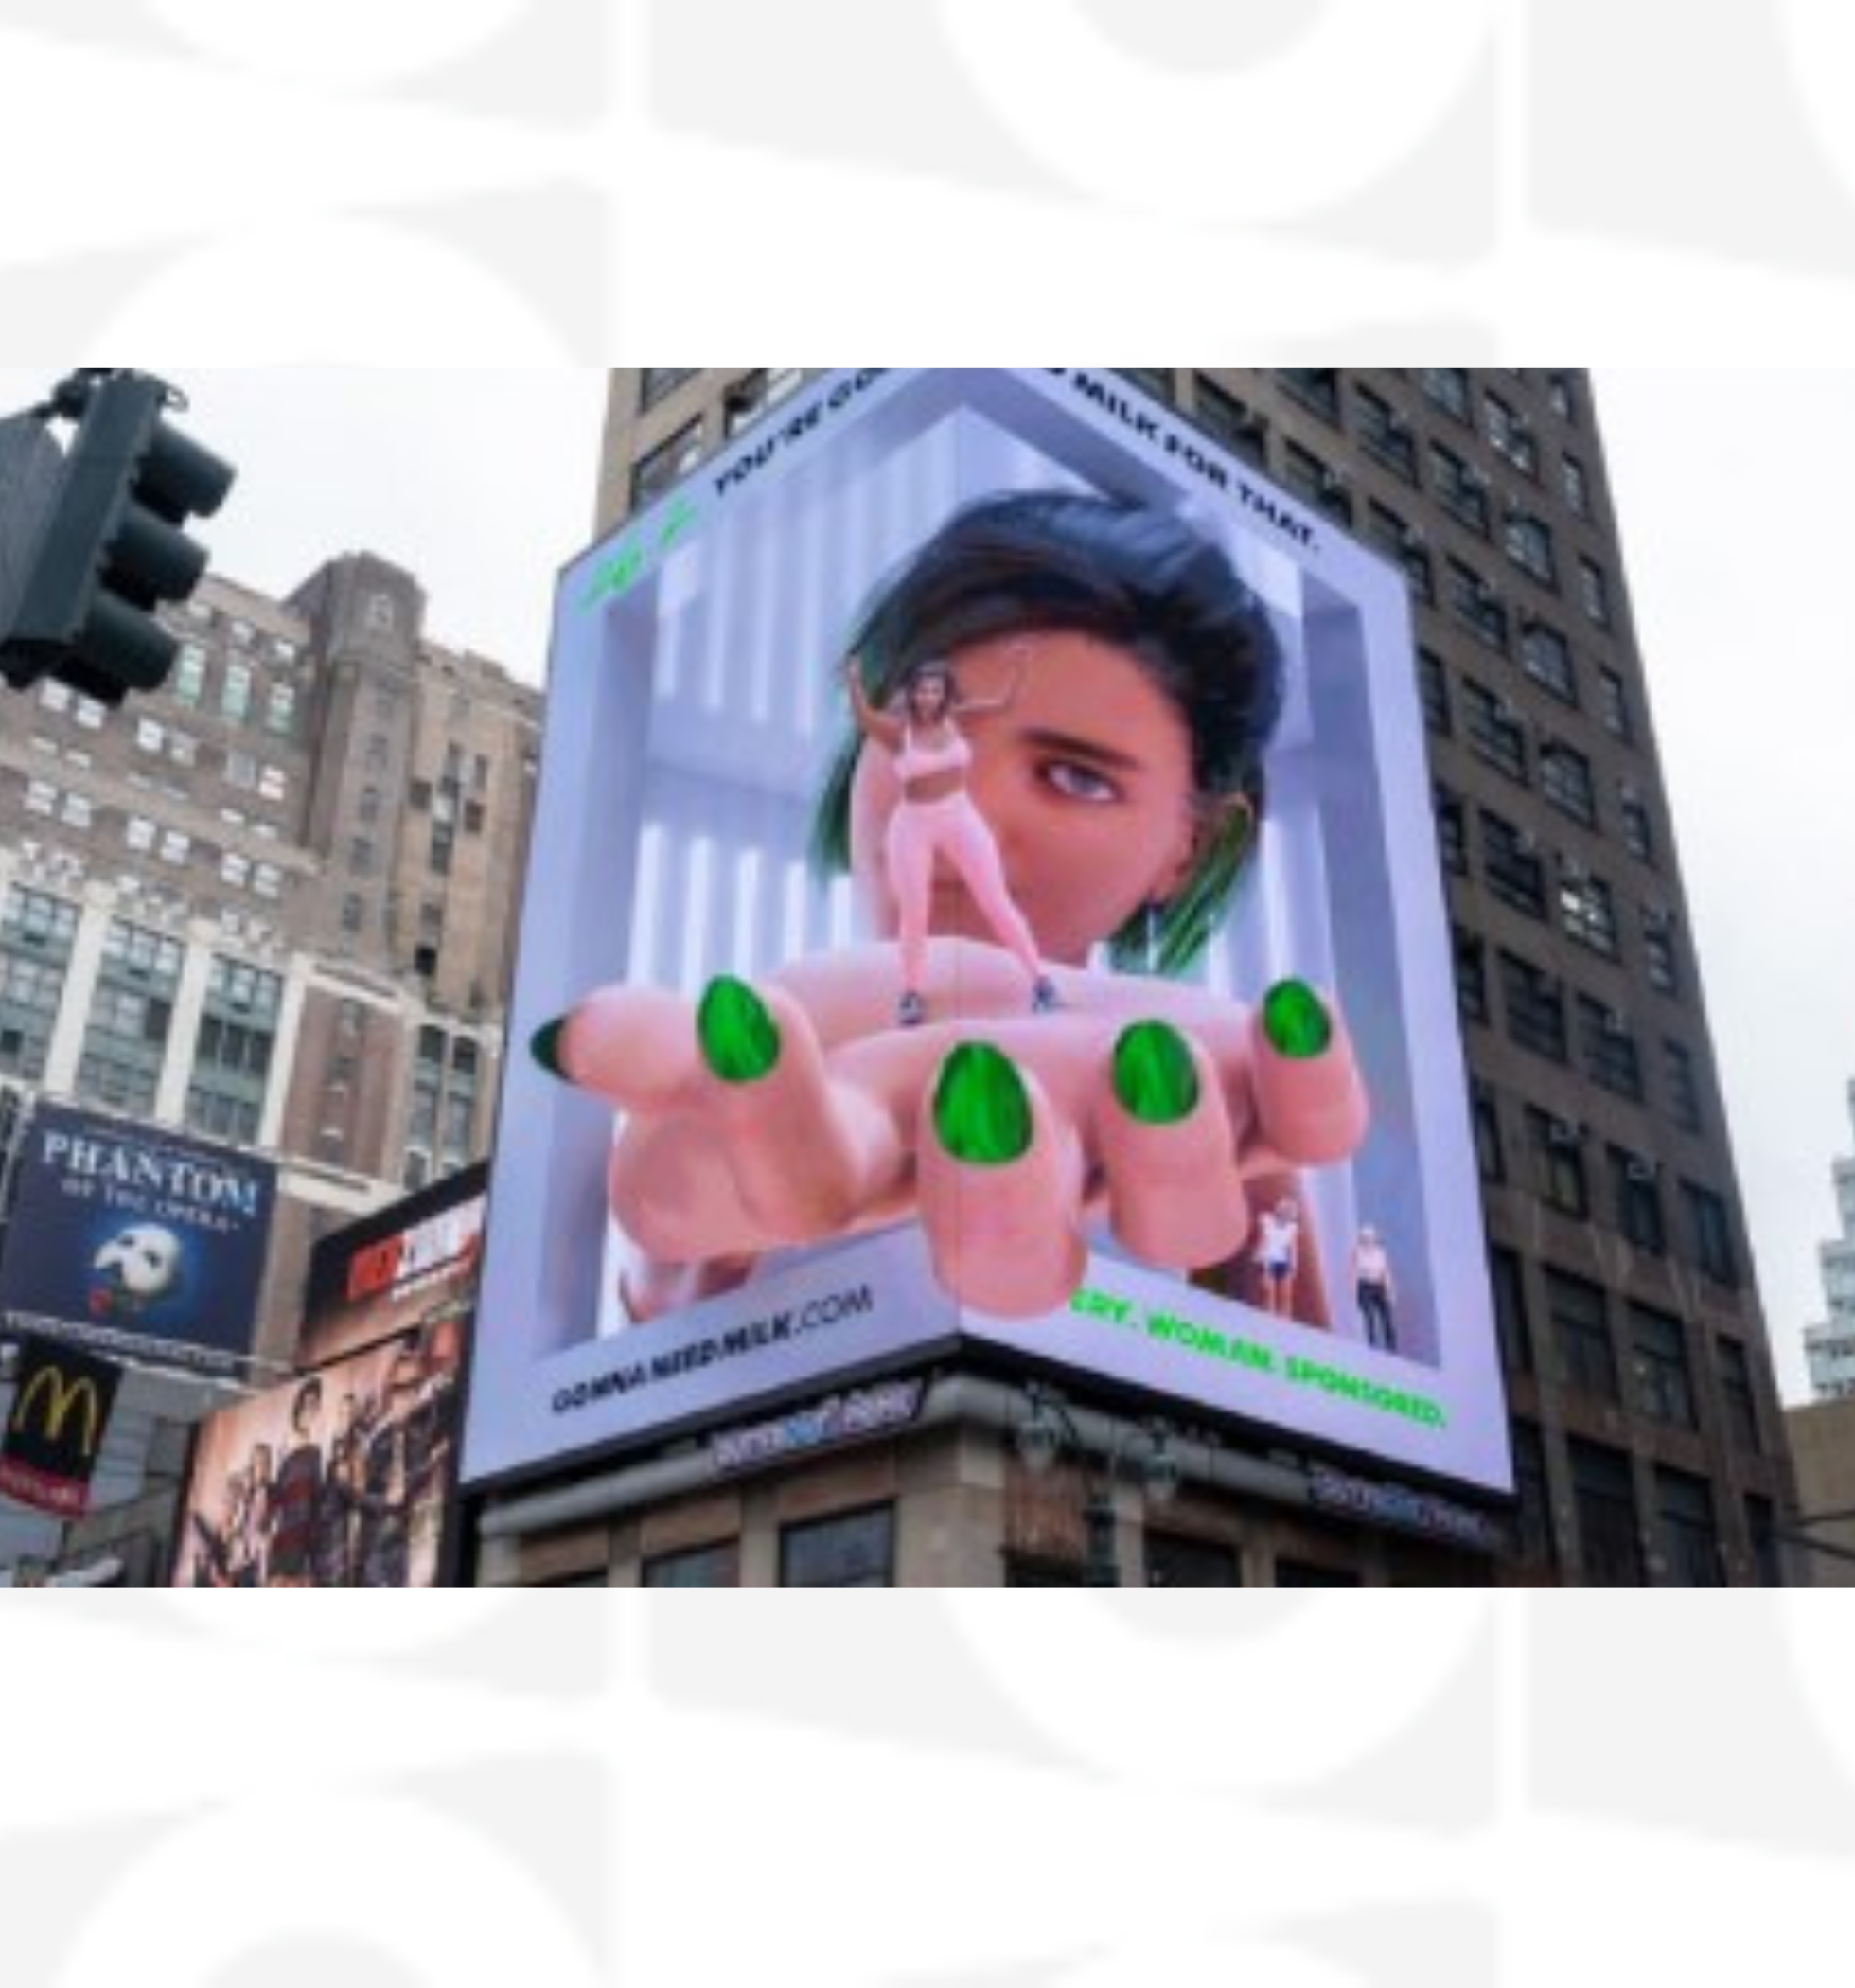 The Year’s Best OOH Campaigns: OAAA Media Plan of the Year Award Winners